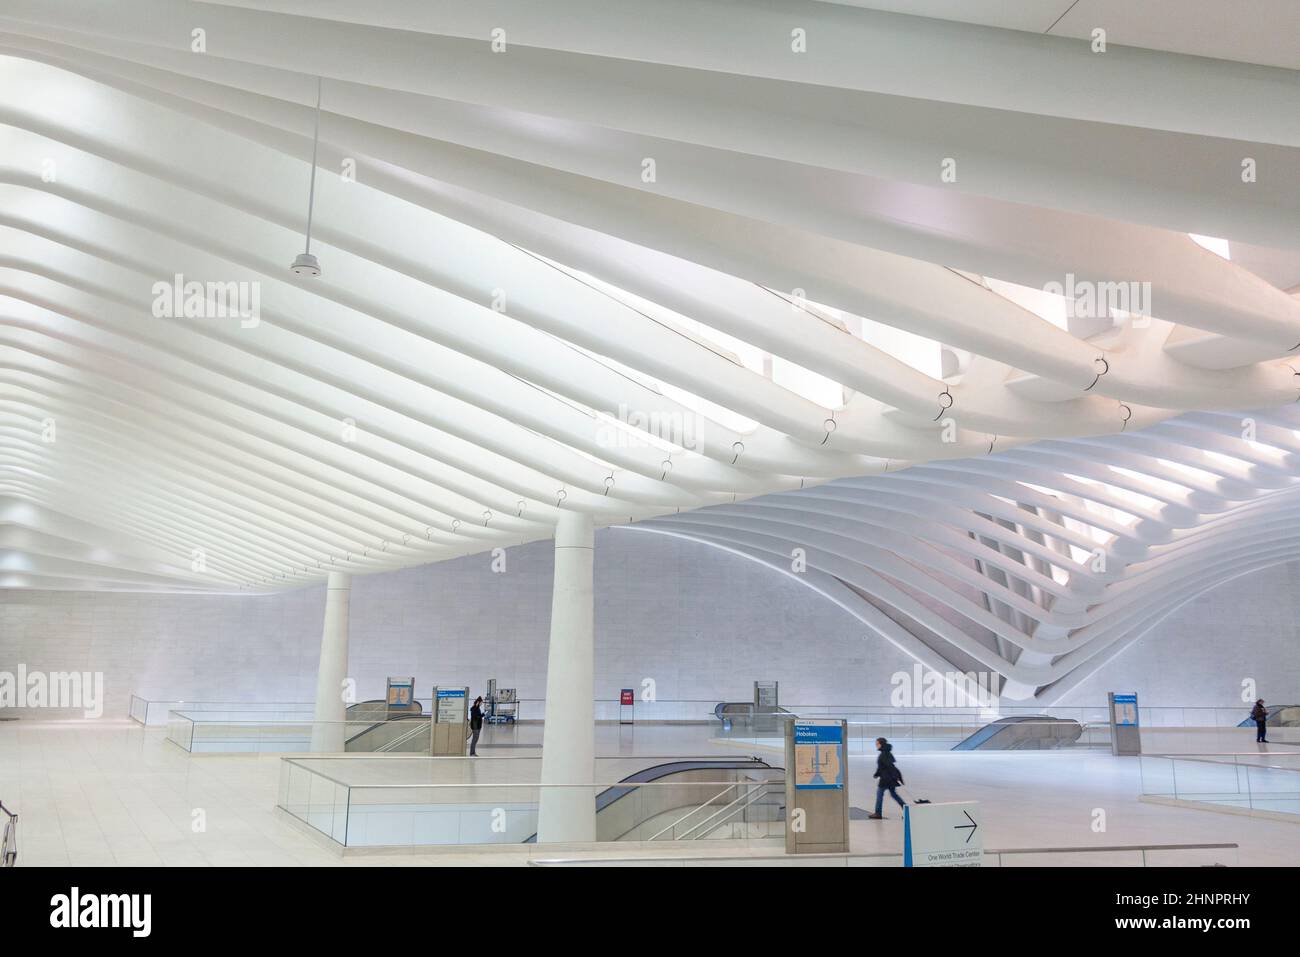 THE OCULUS. The Oculus Transportation Hub at new World Trade Center NYC Subway Station. Oculus, the main station house interior view. Stock Photo